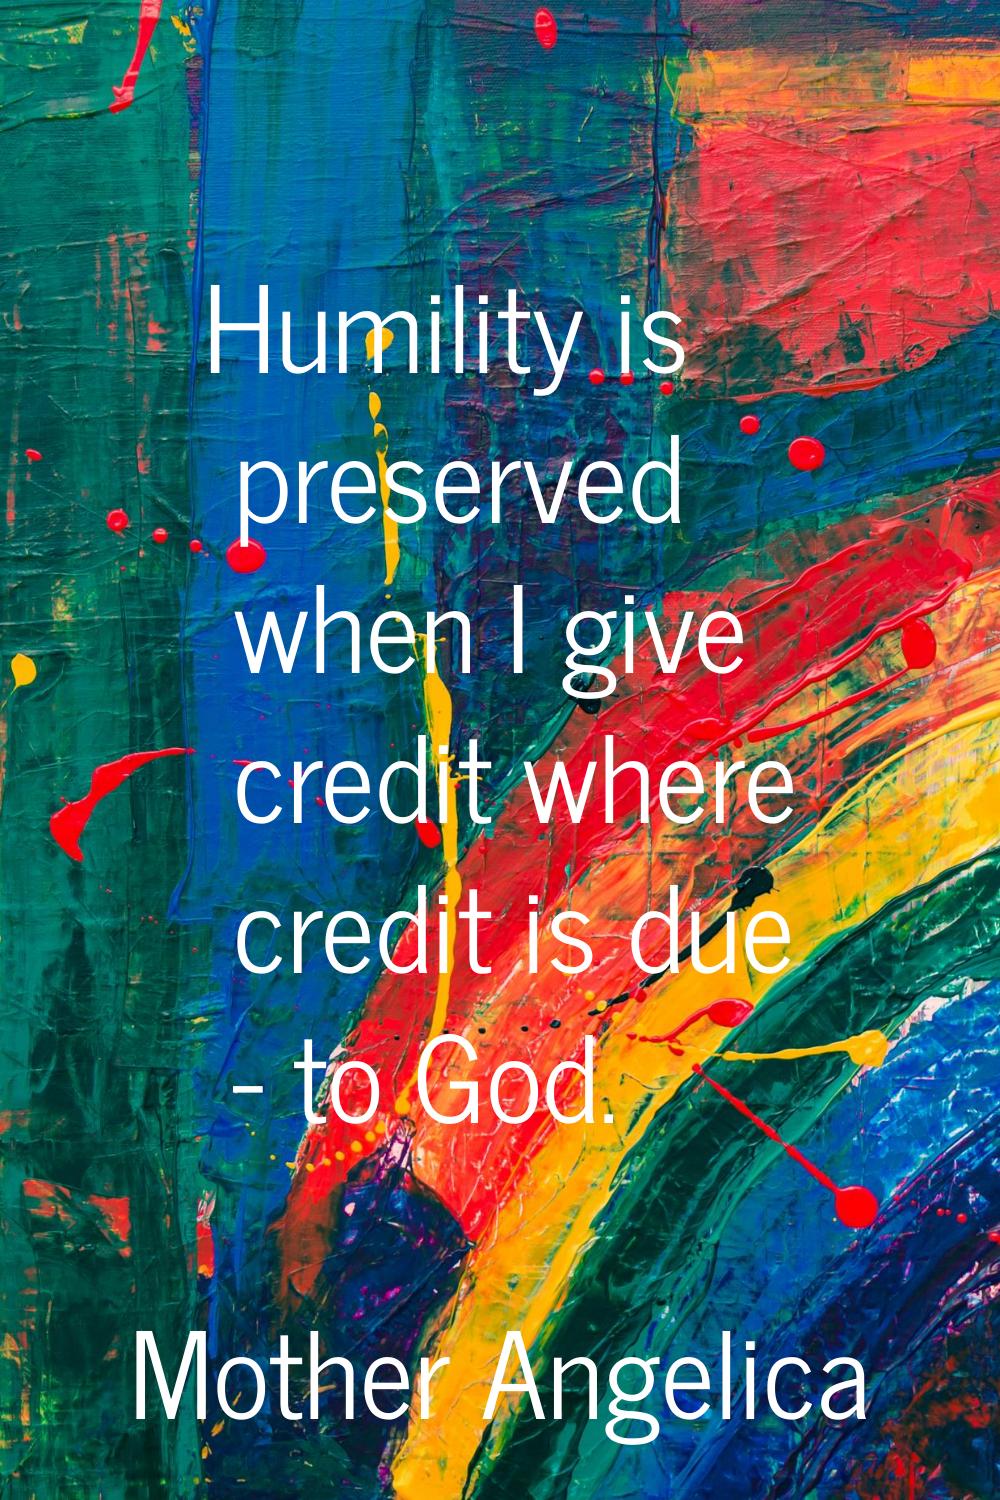 Humility is preserved when I give credit where credit is due - to God.